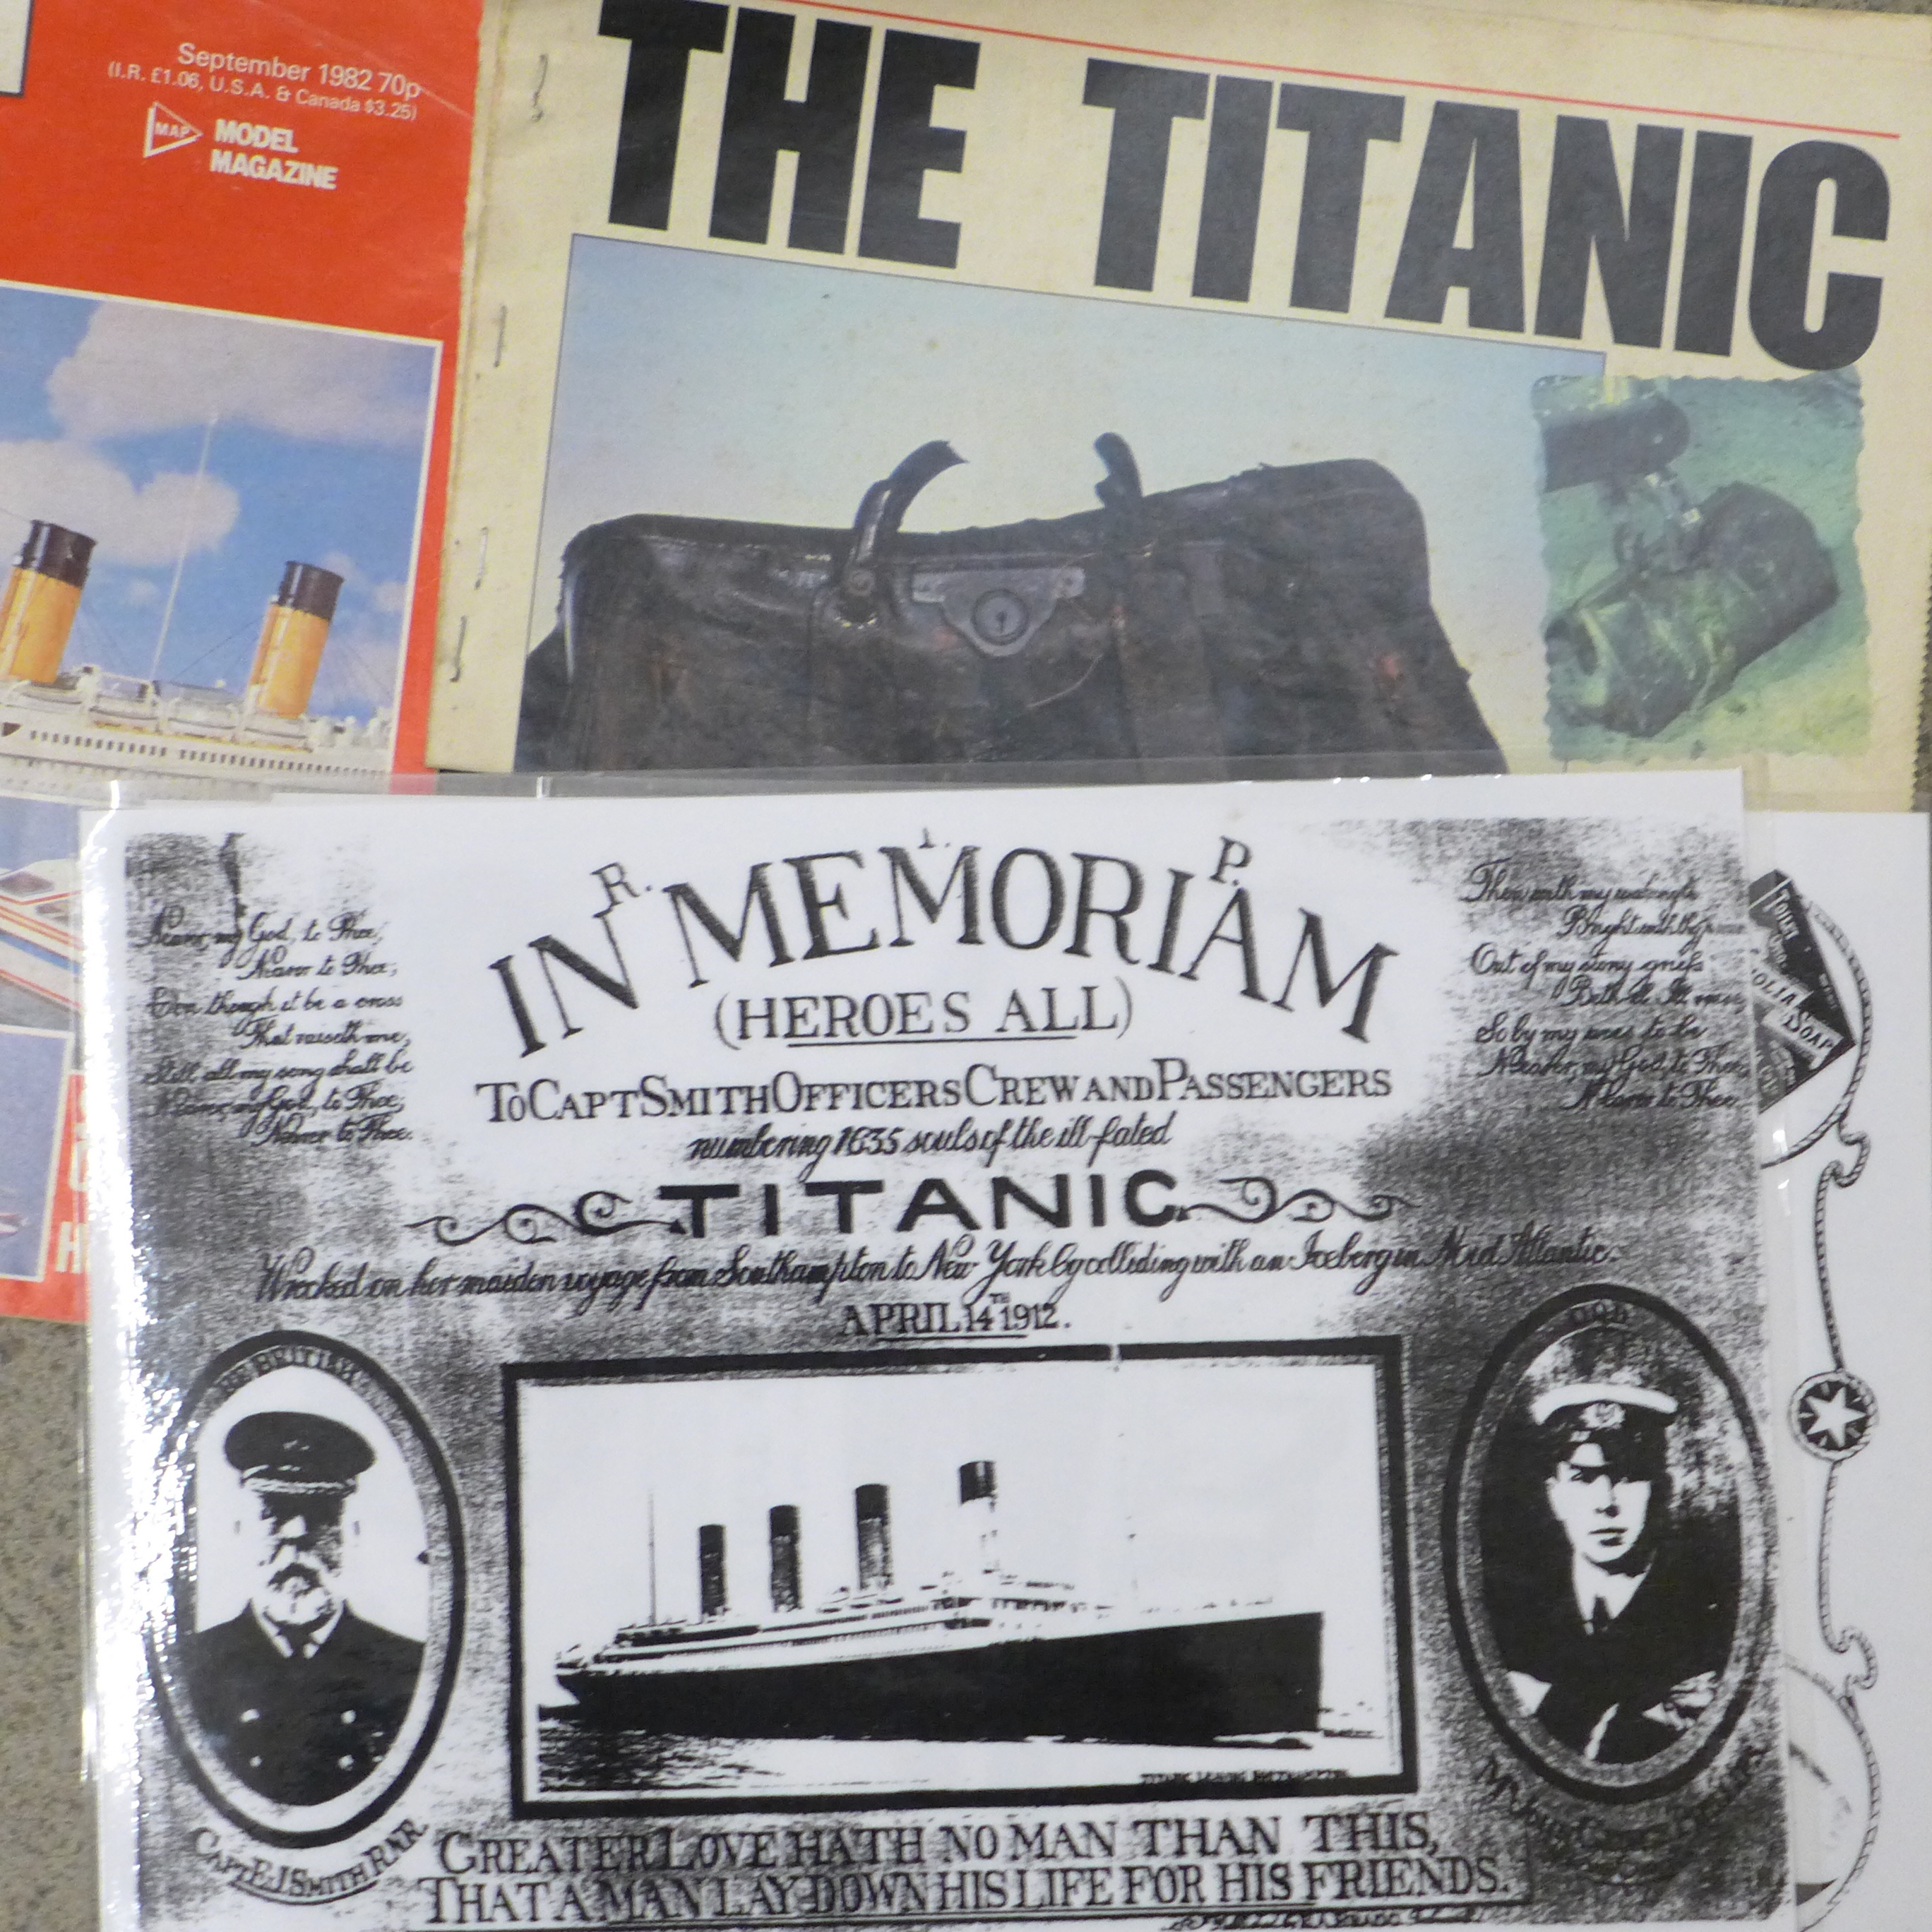 Titanic reproduction photographs, postcards and related books - Image 4 of 5